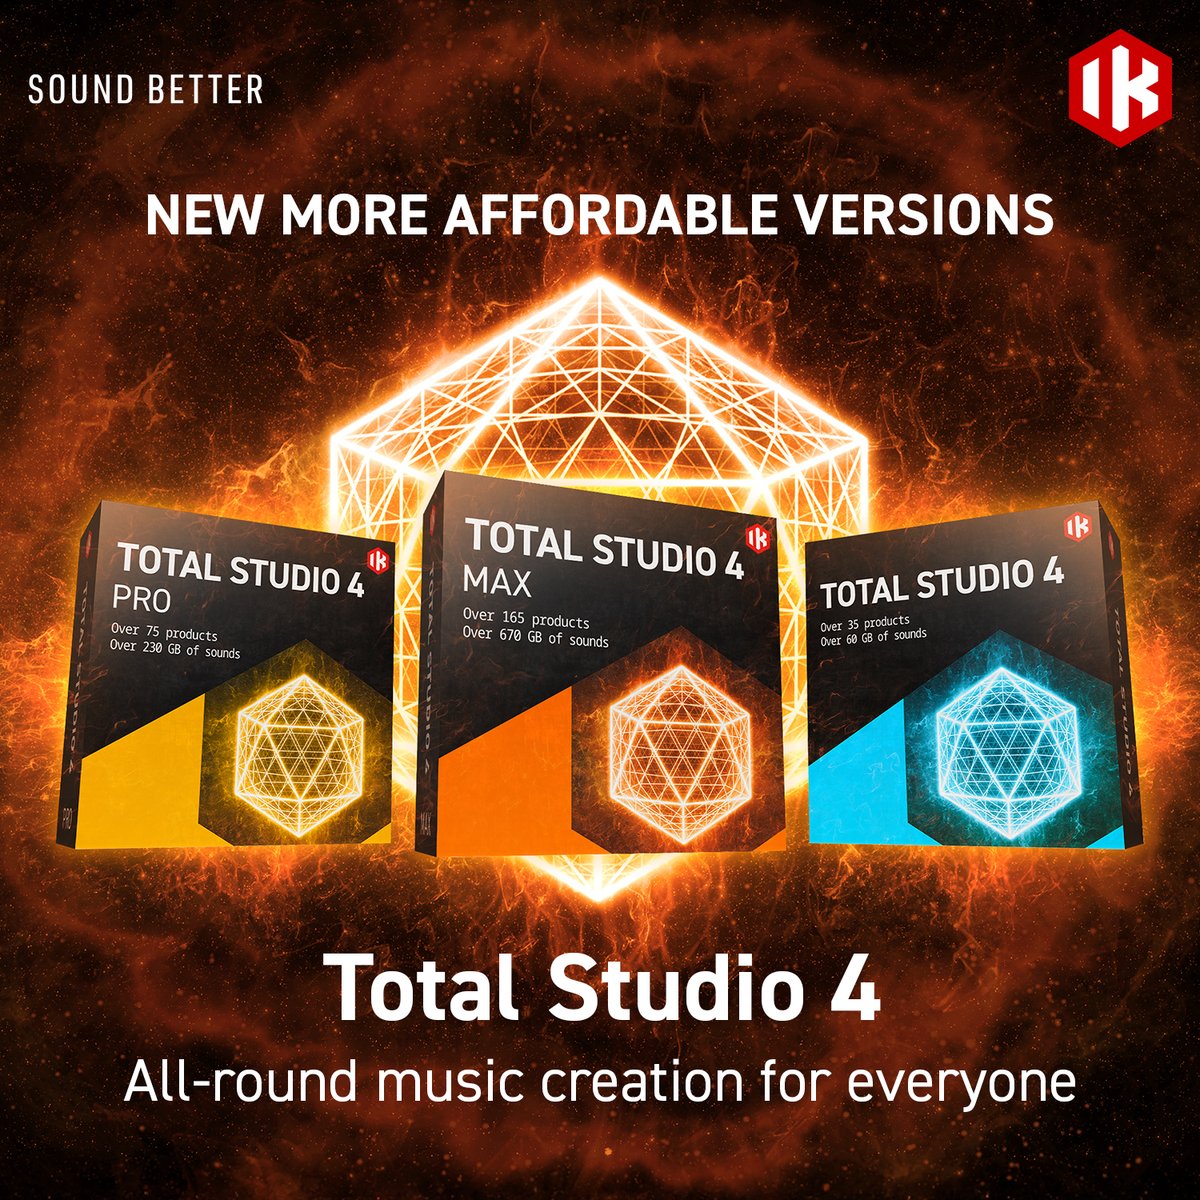 We're pleased to introduce two new versions of Total Studio 4 adding new, affordable entry points for everyone into IK's all-round music production suite. bit.ly/newversionsts4